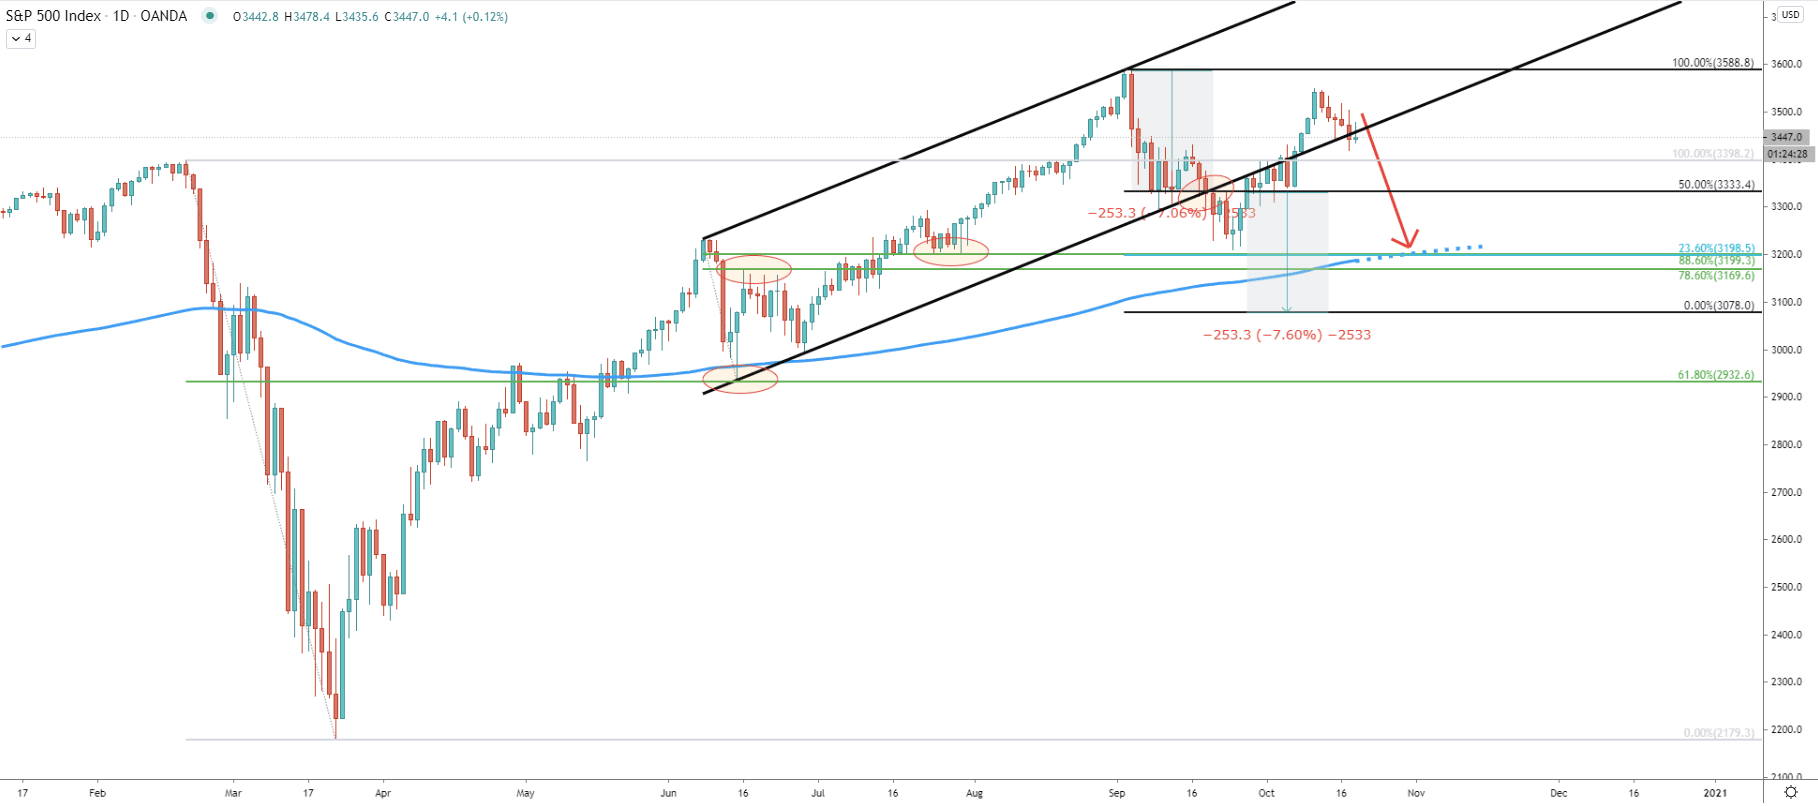 S&P500 Daily Technical Analysis 20 Oct 2020